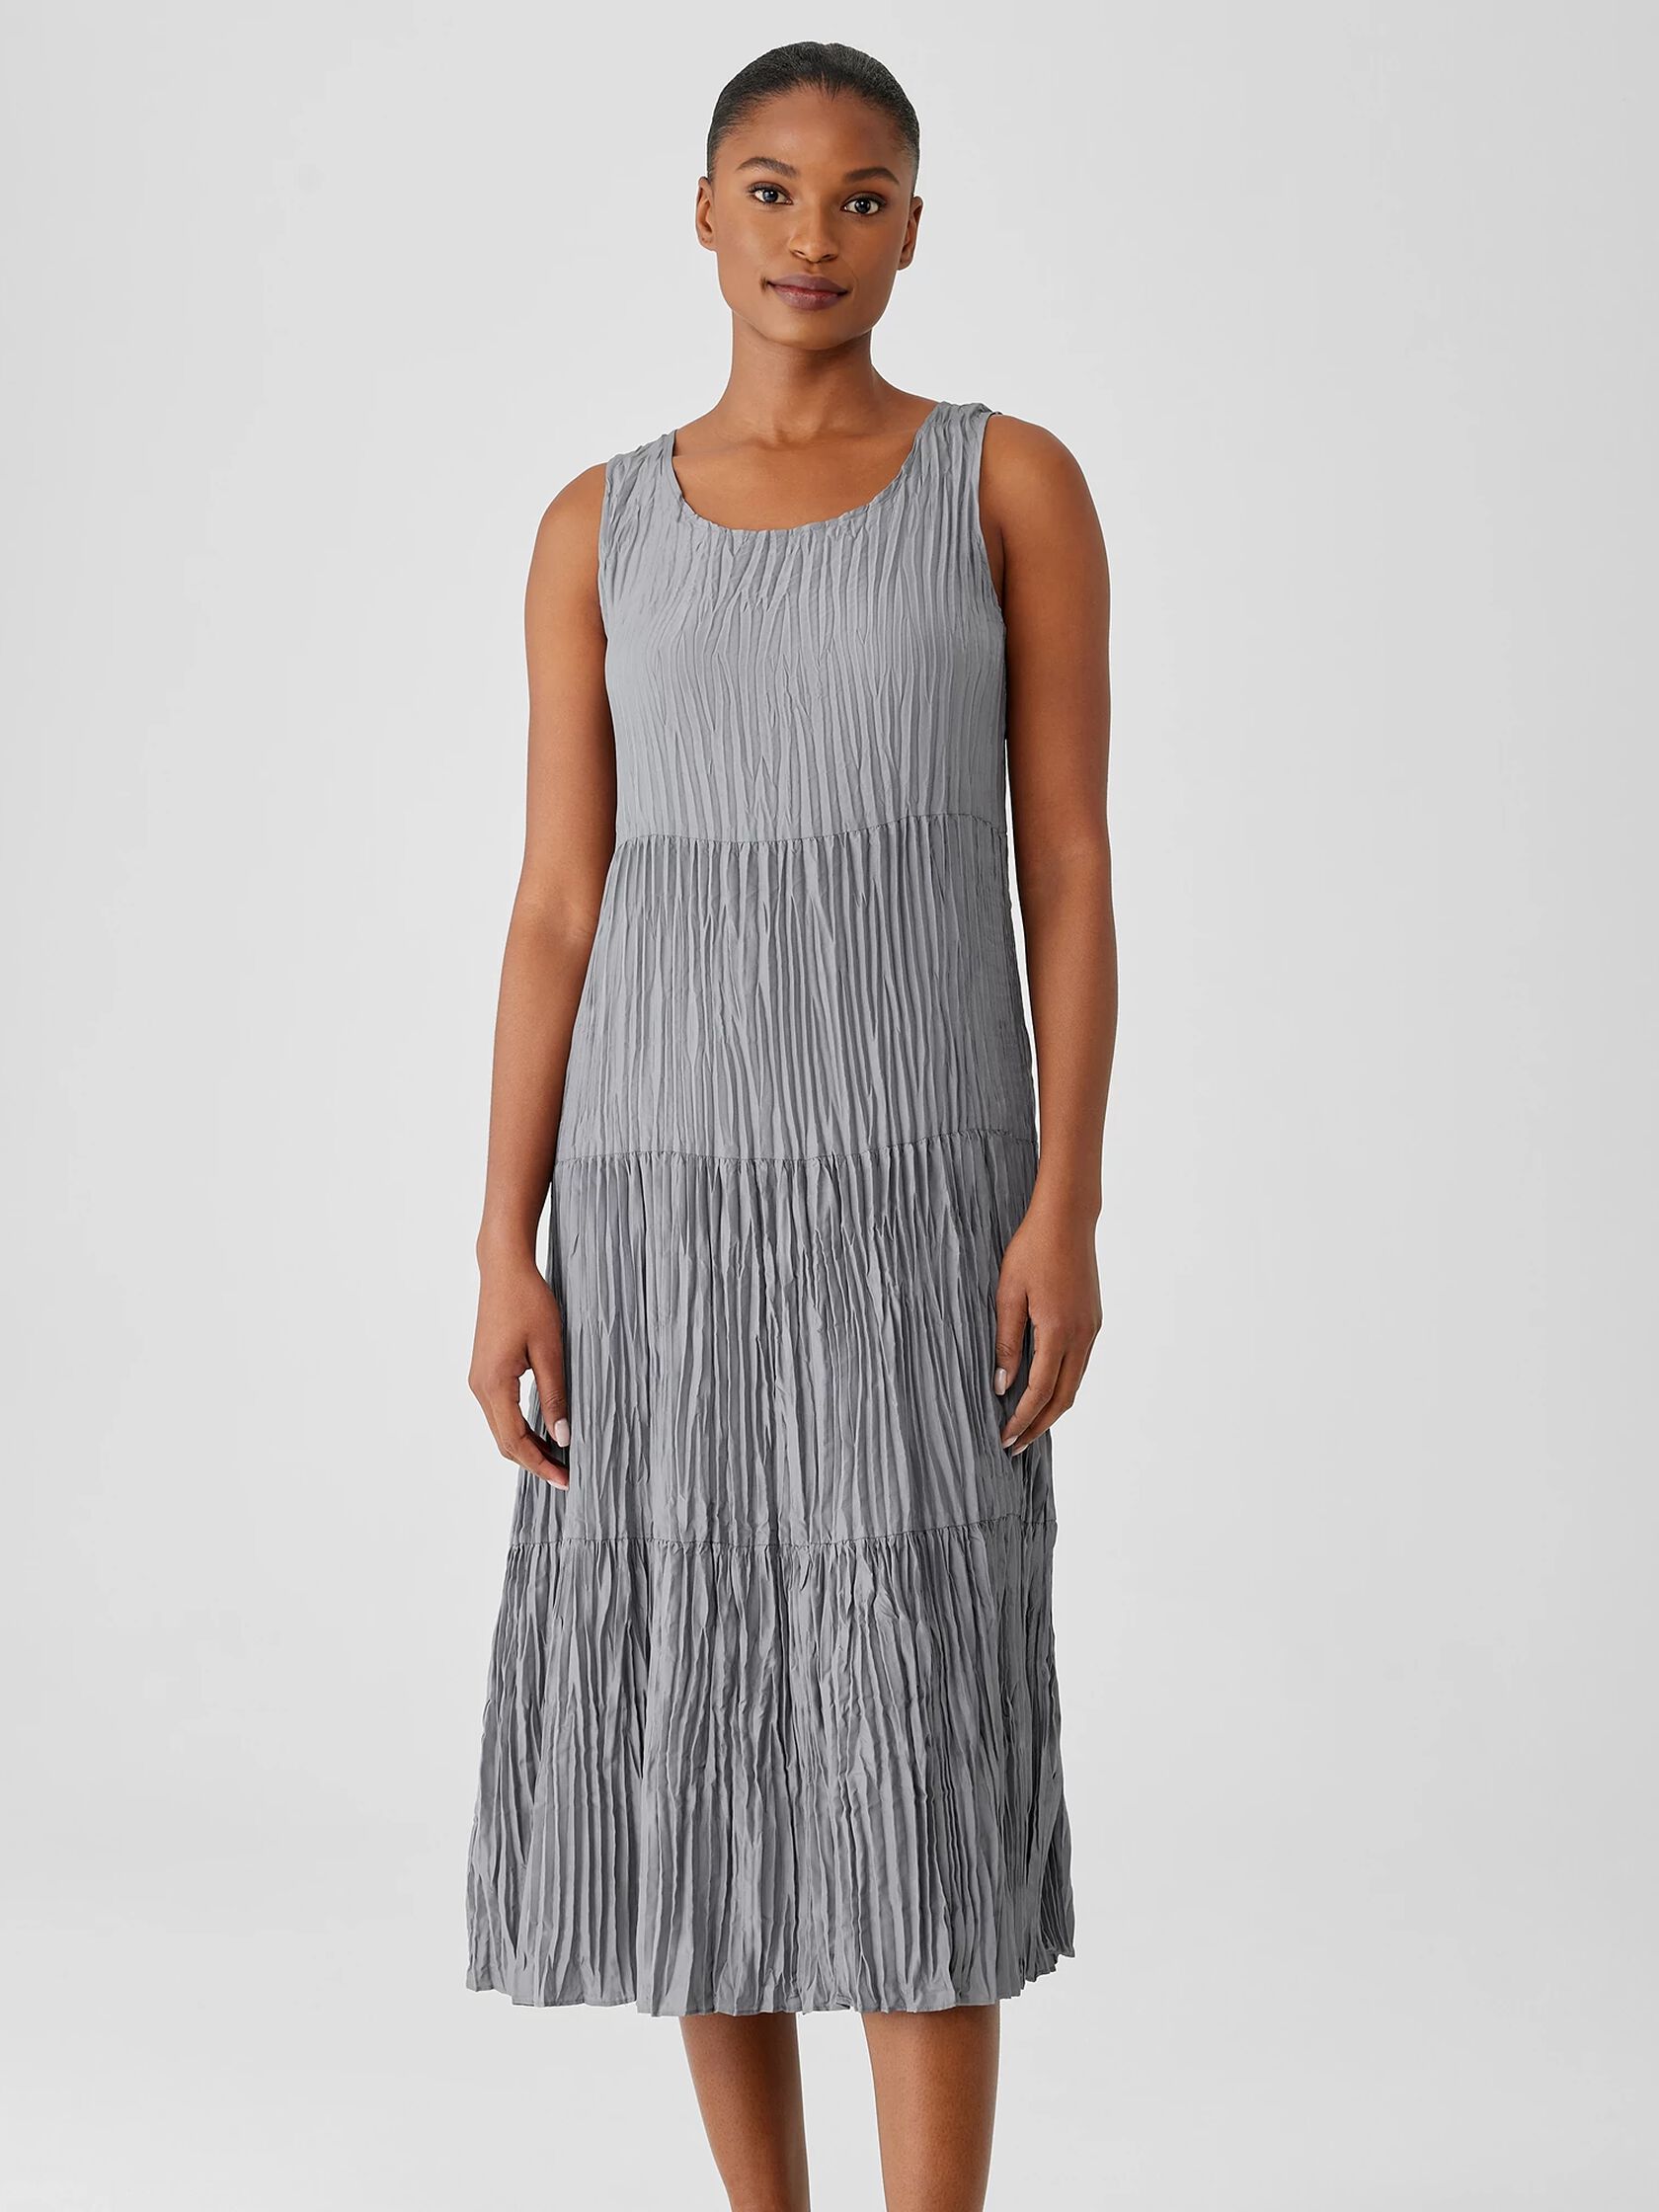 Crushed Silk Tiered Dress | EILEEN FISHER